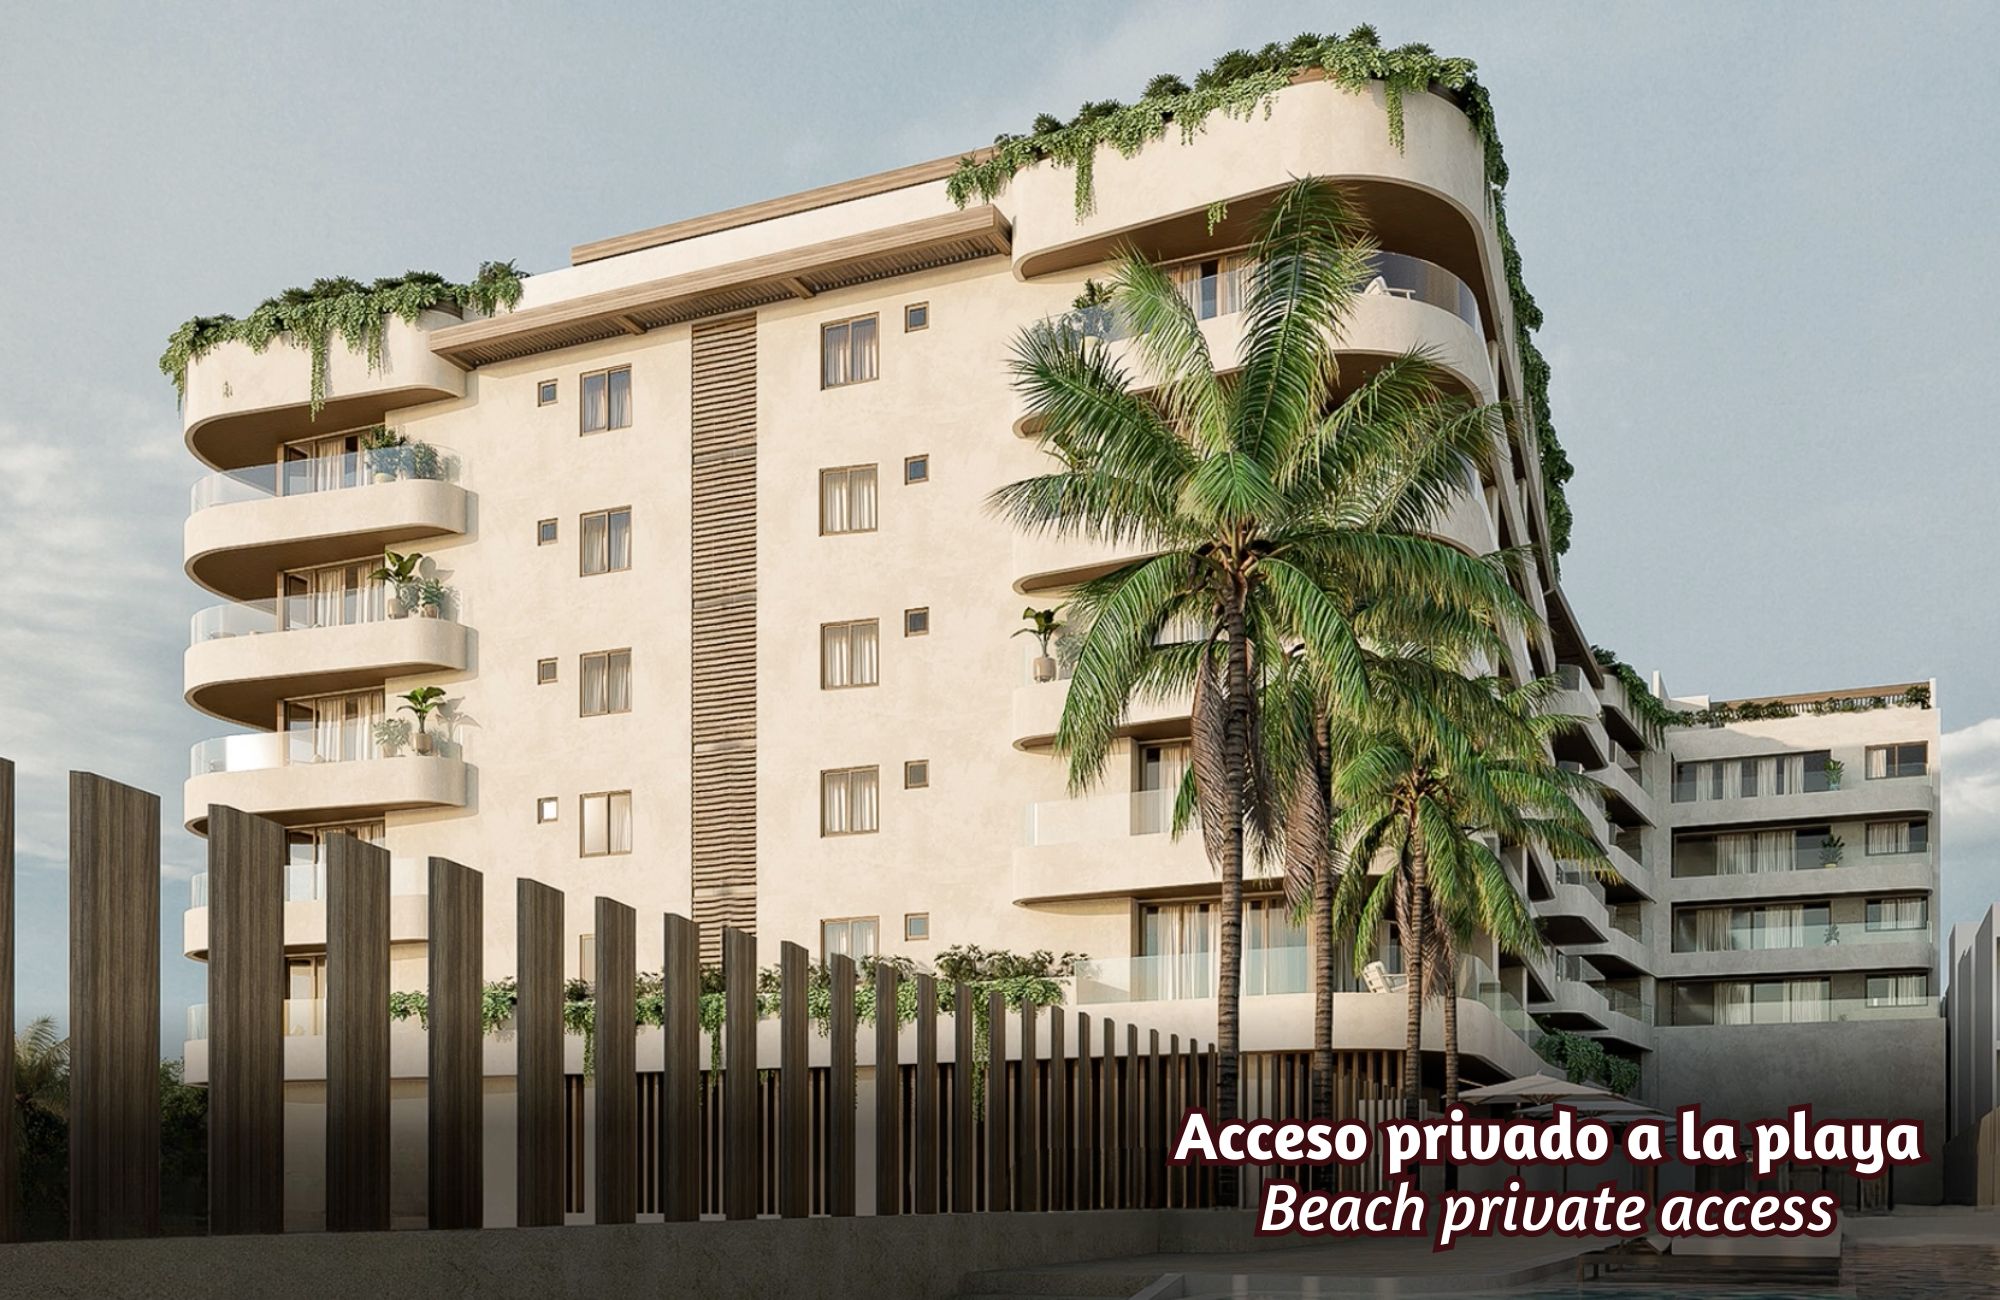 Oceanfront apartment, 2 jacuzzis, lock off system, private beach, gym, pet area, and more pre-construction, Puerto Morelos for sale.